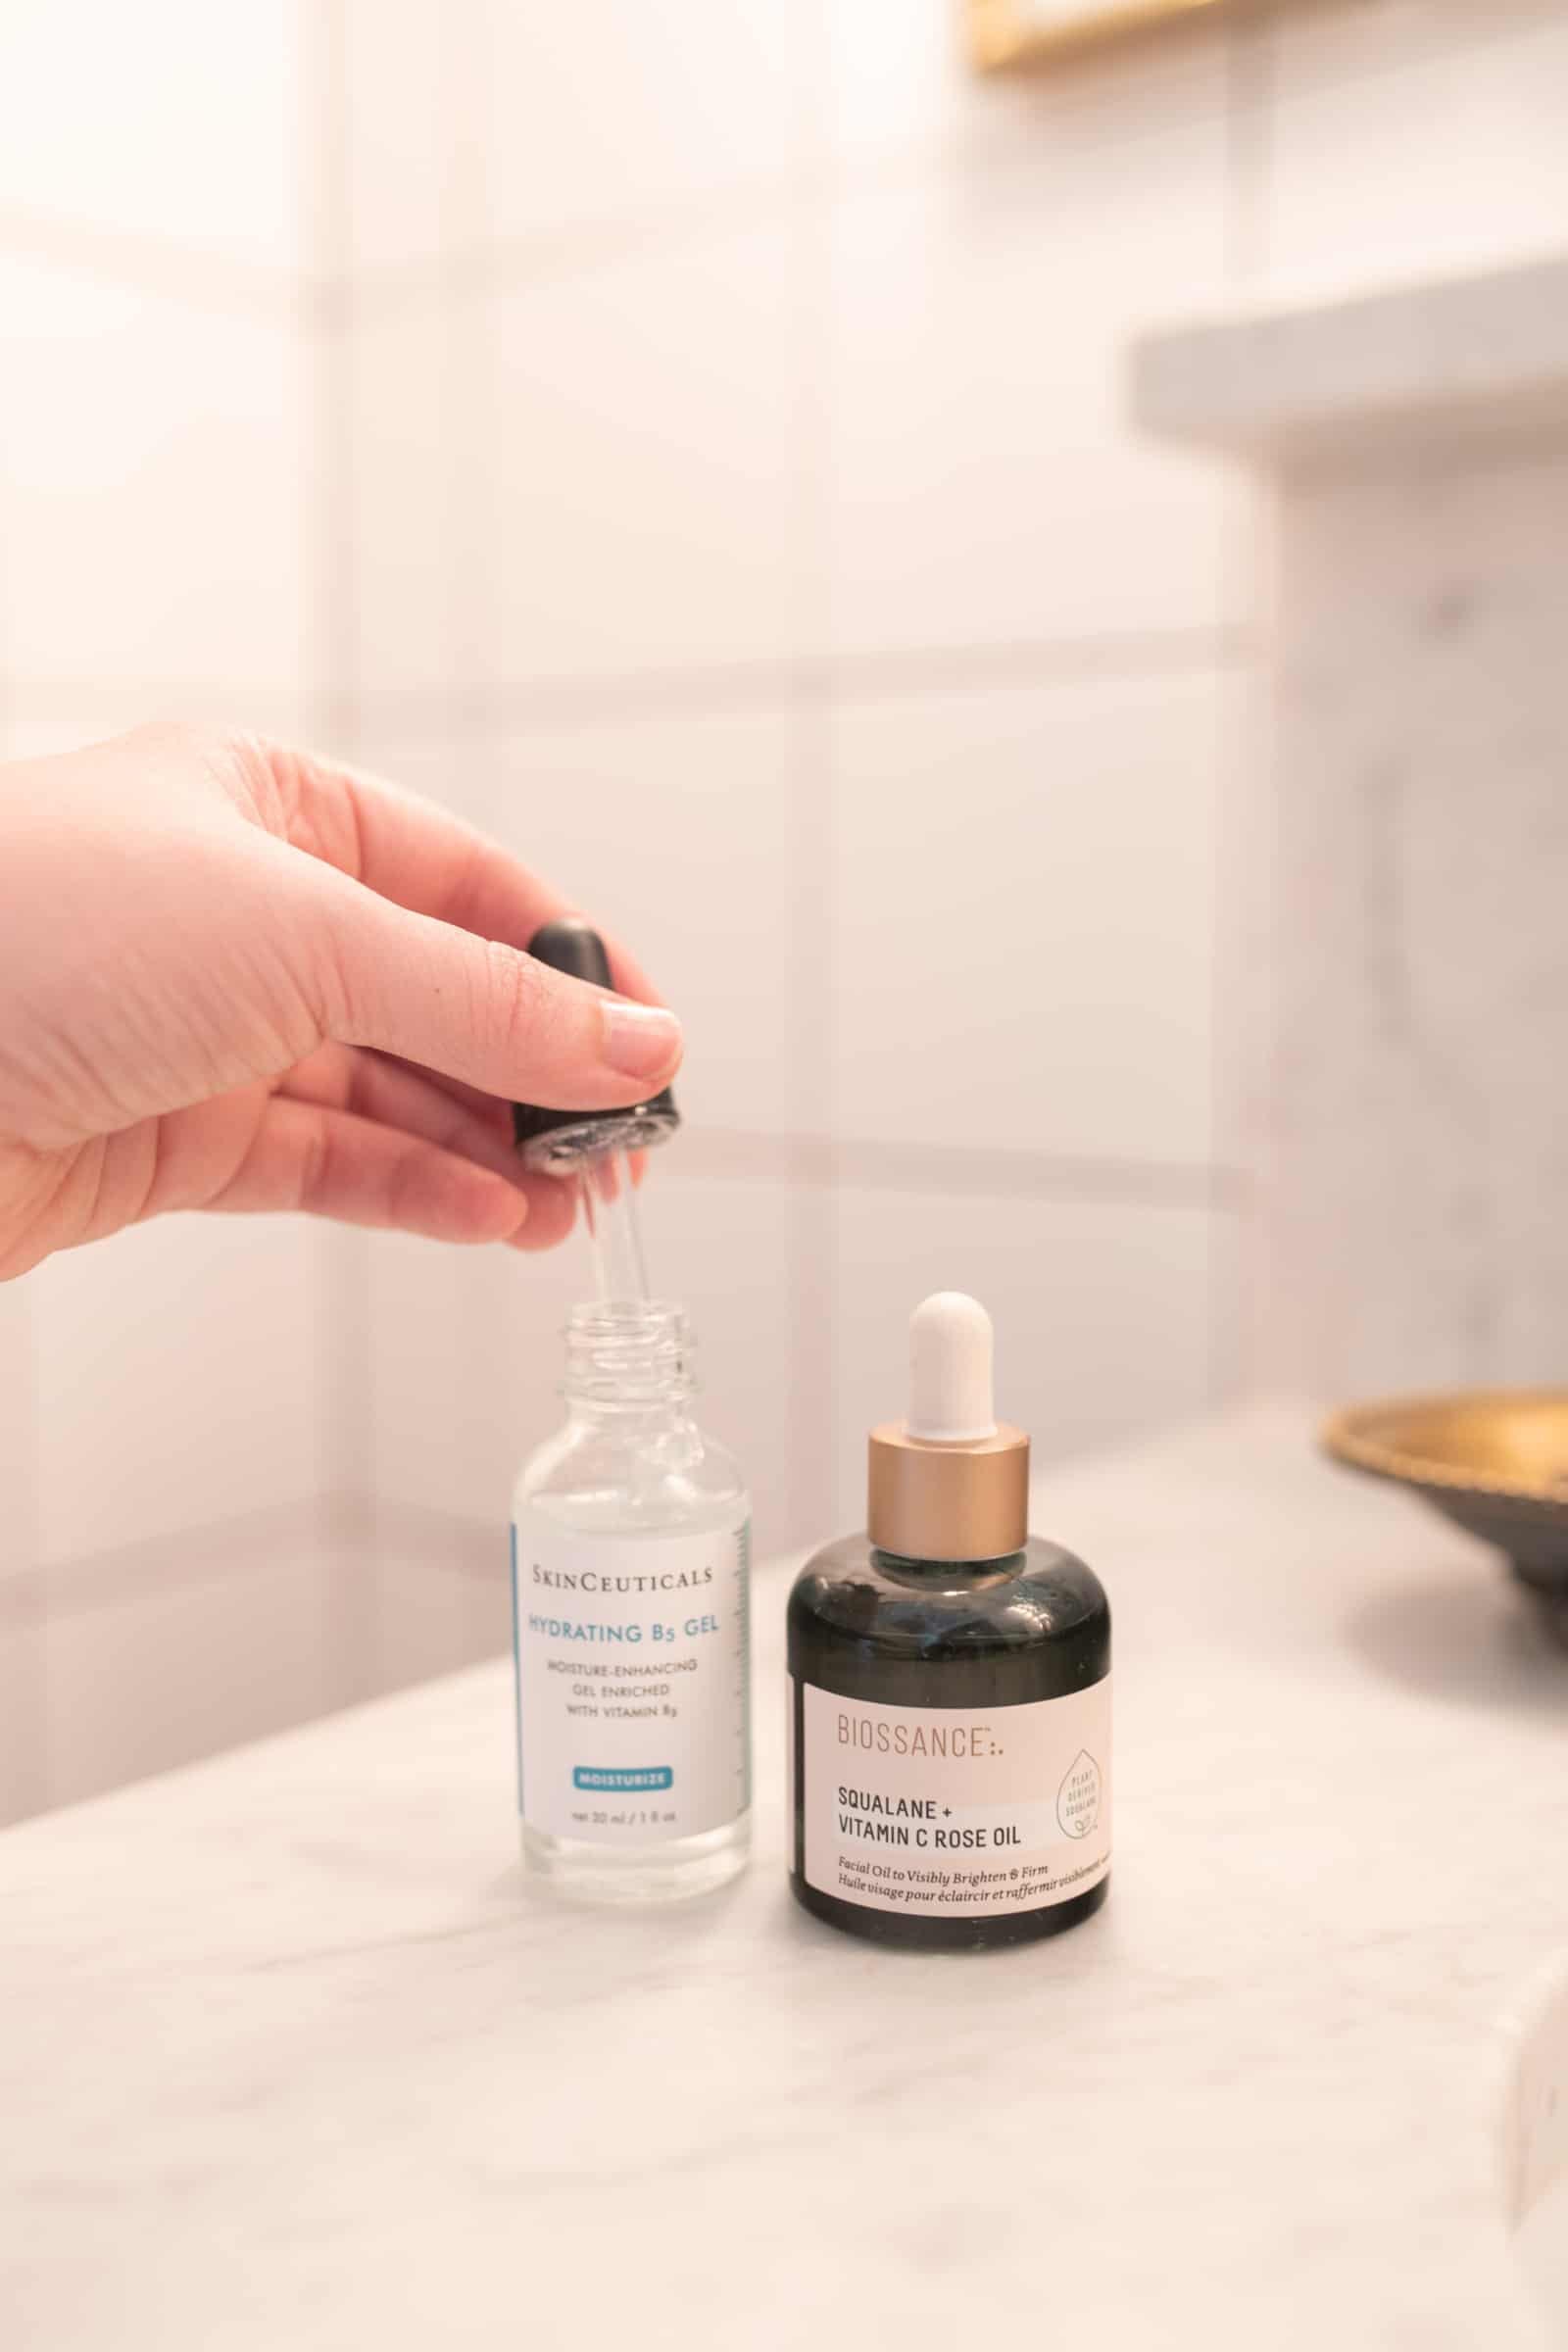 Biossance Oil and Skinceuticals B5 Gel